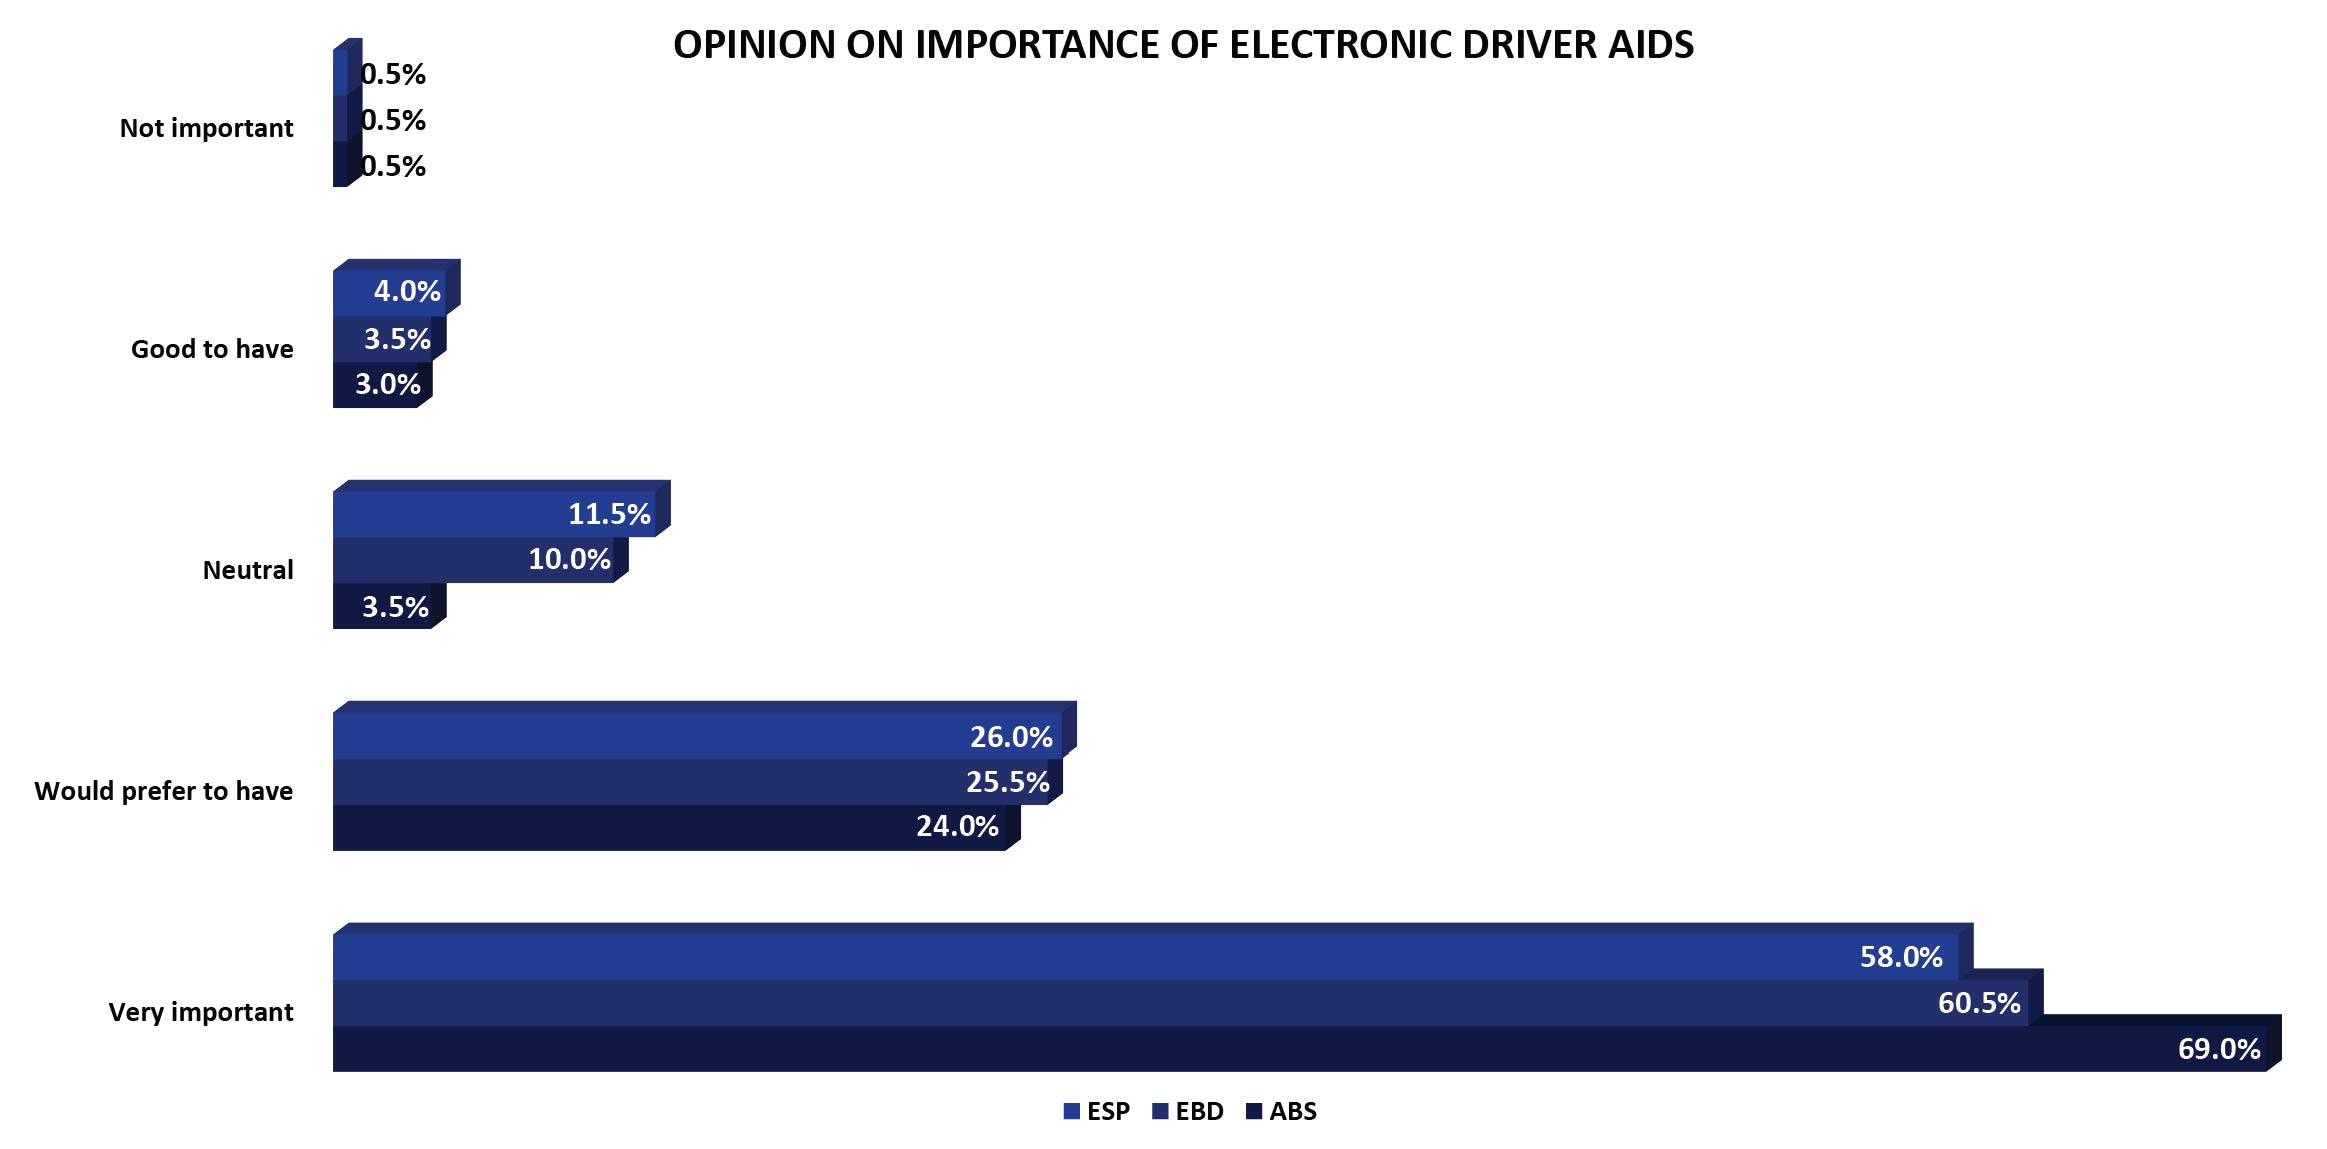 Importance of Electronic Driver AIDS